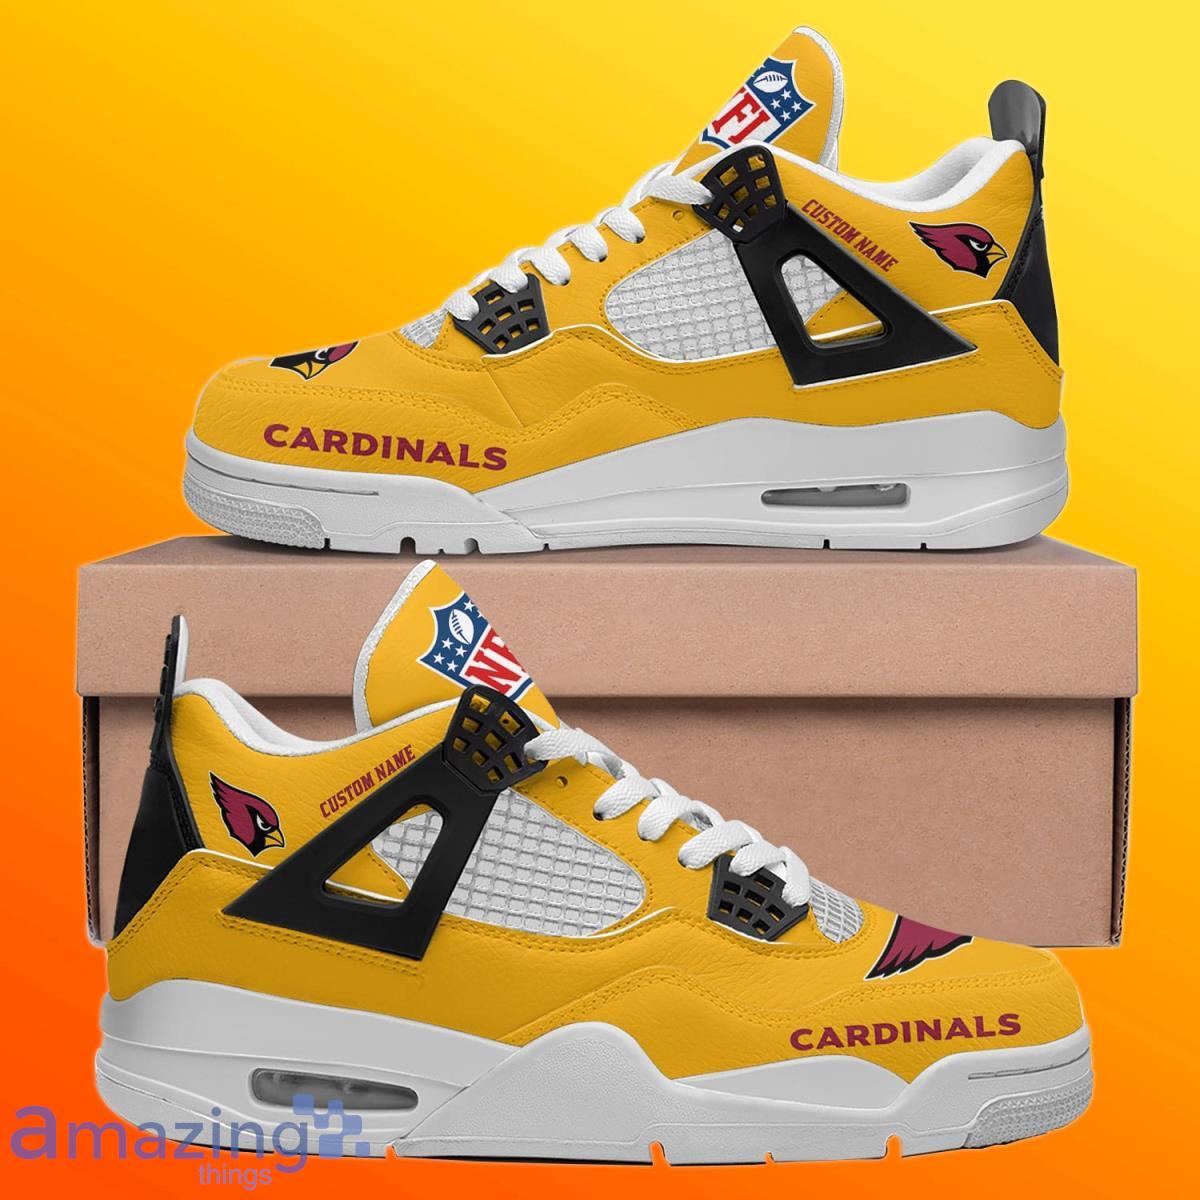 Arizona Cardinals Personalized Name NFL Air Jordan 4 Trending Sneaker Unique Gift For Fans Product Photo 2